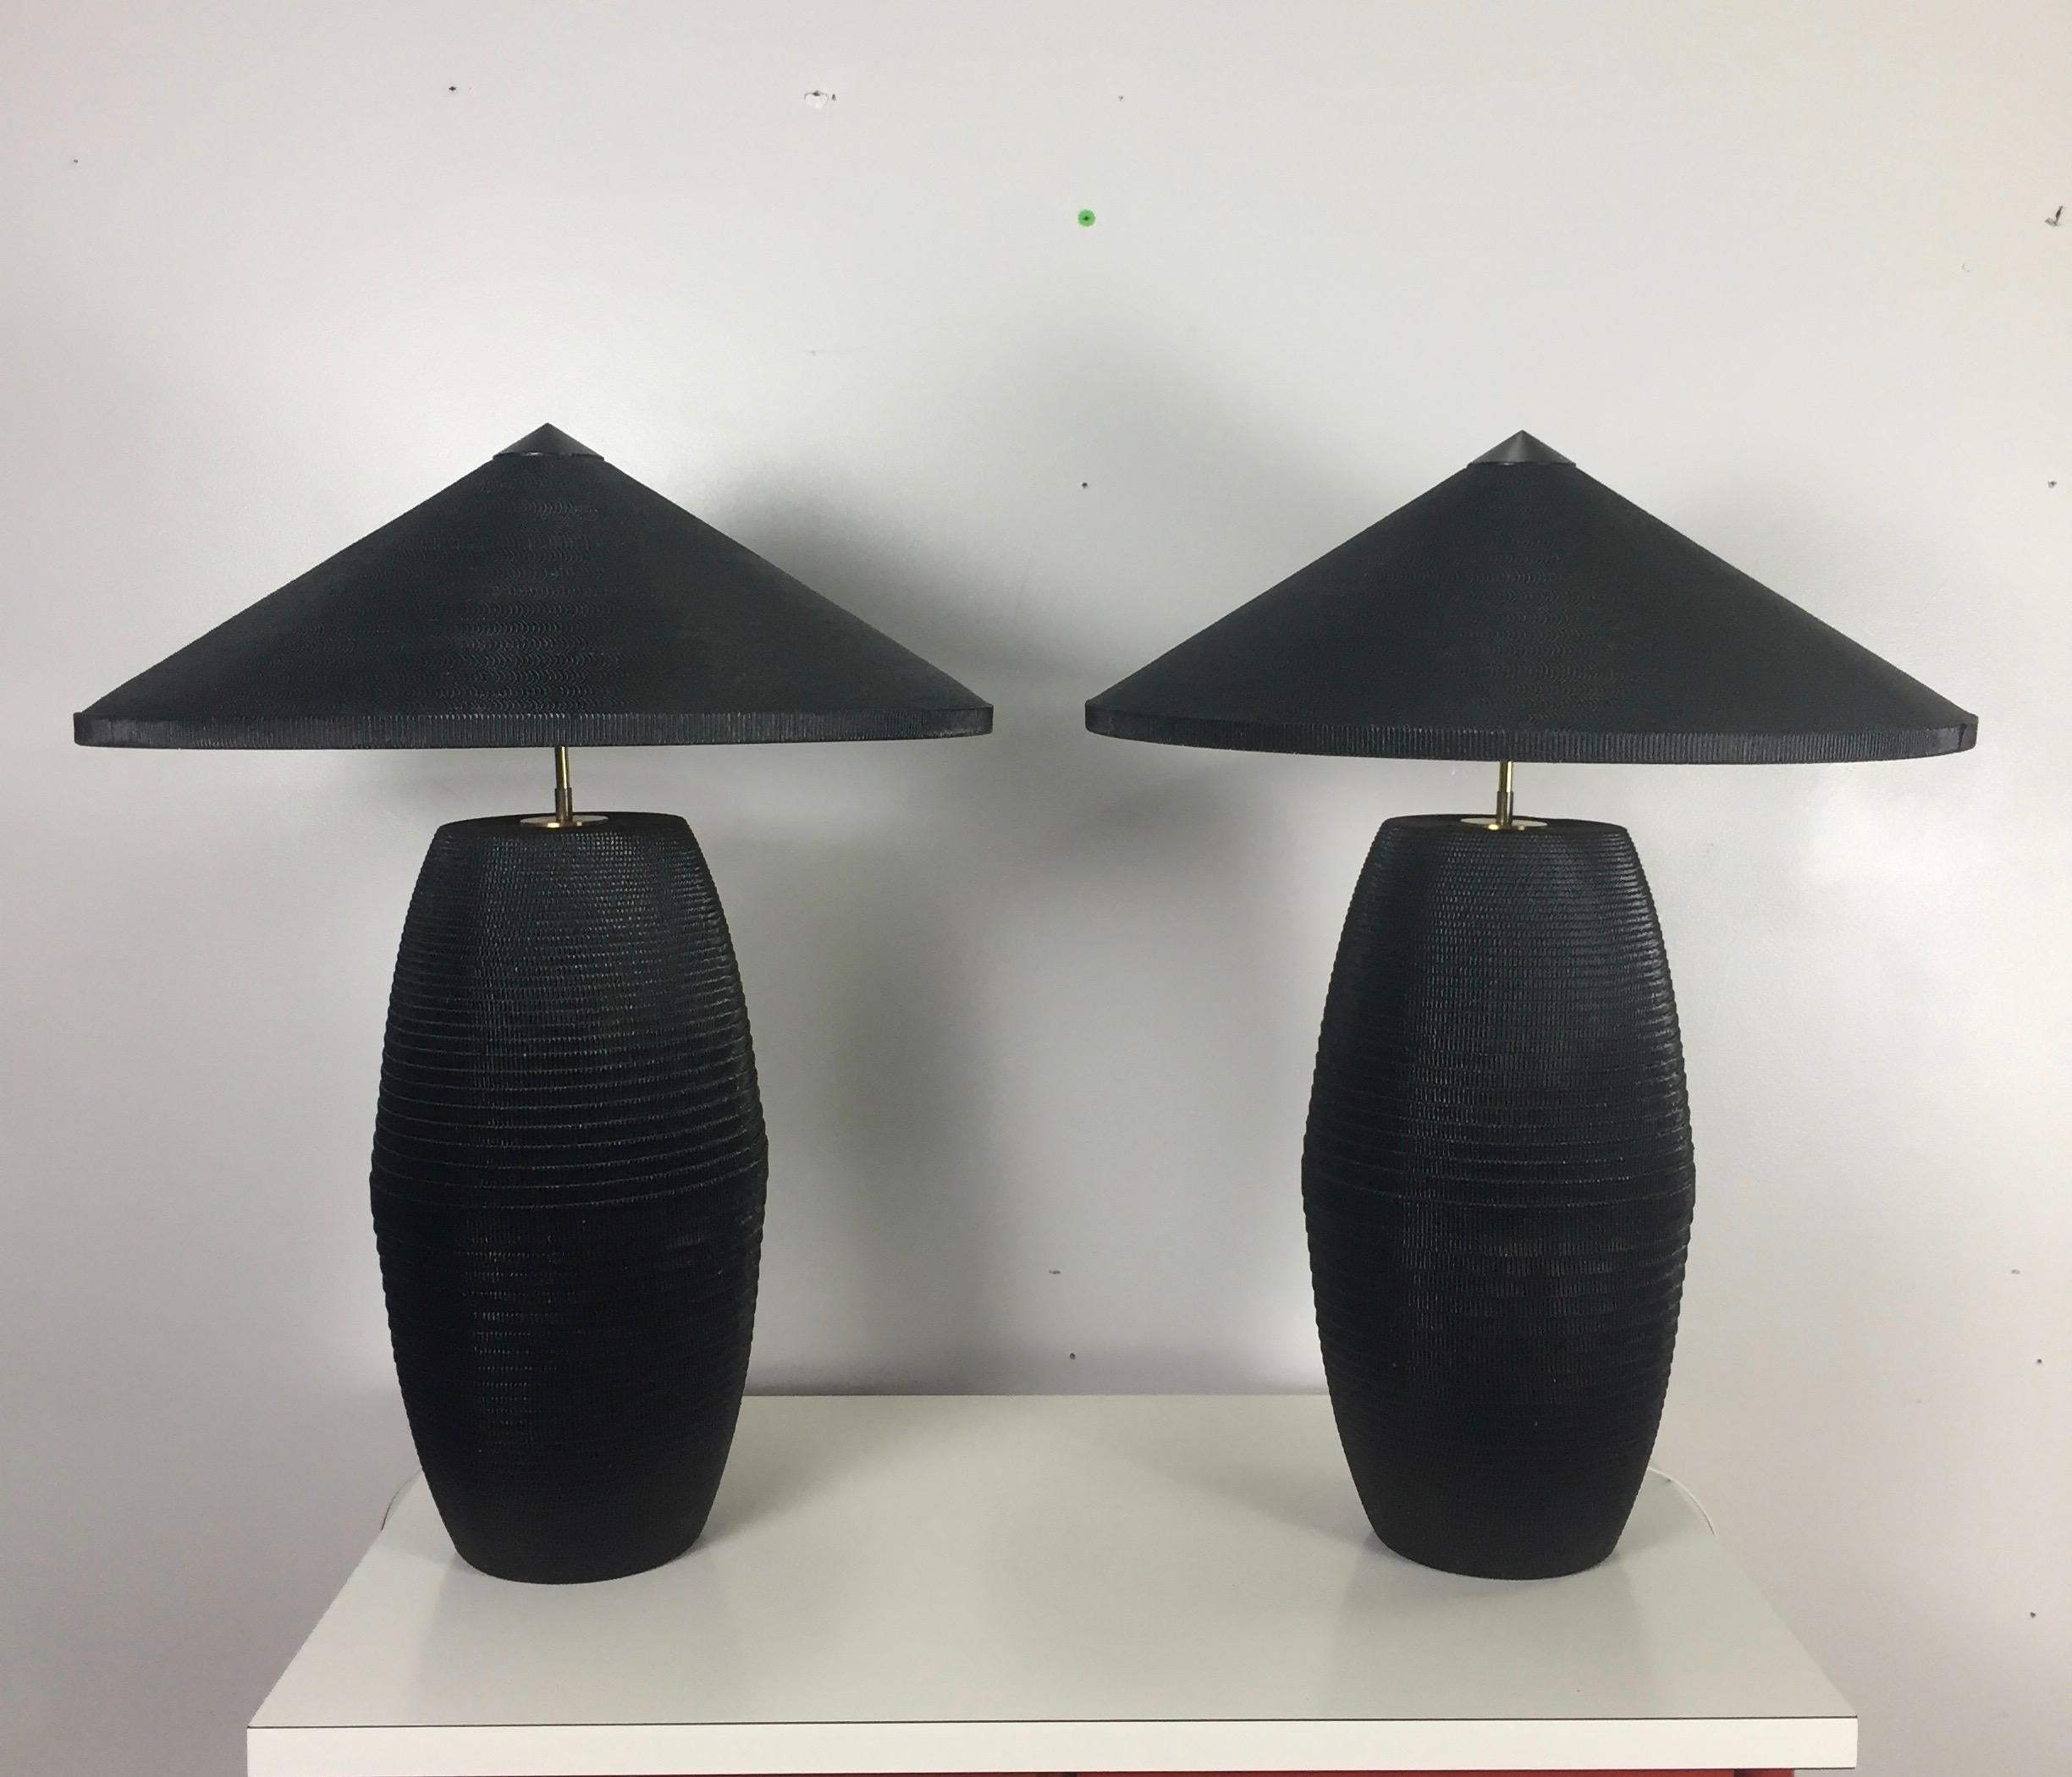 This pair of exceptional lamps complete with original shades is most likely from the 1980s or 1990s. Produced from wrapped corrugated cardboard these lamps have a lovely column shape with an Asian inspired theme to the shades. The shades are cut